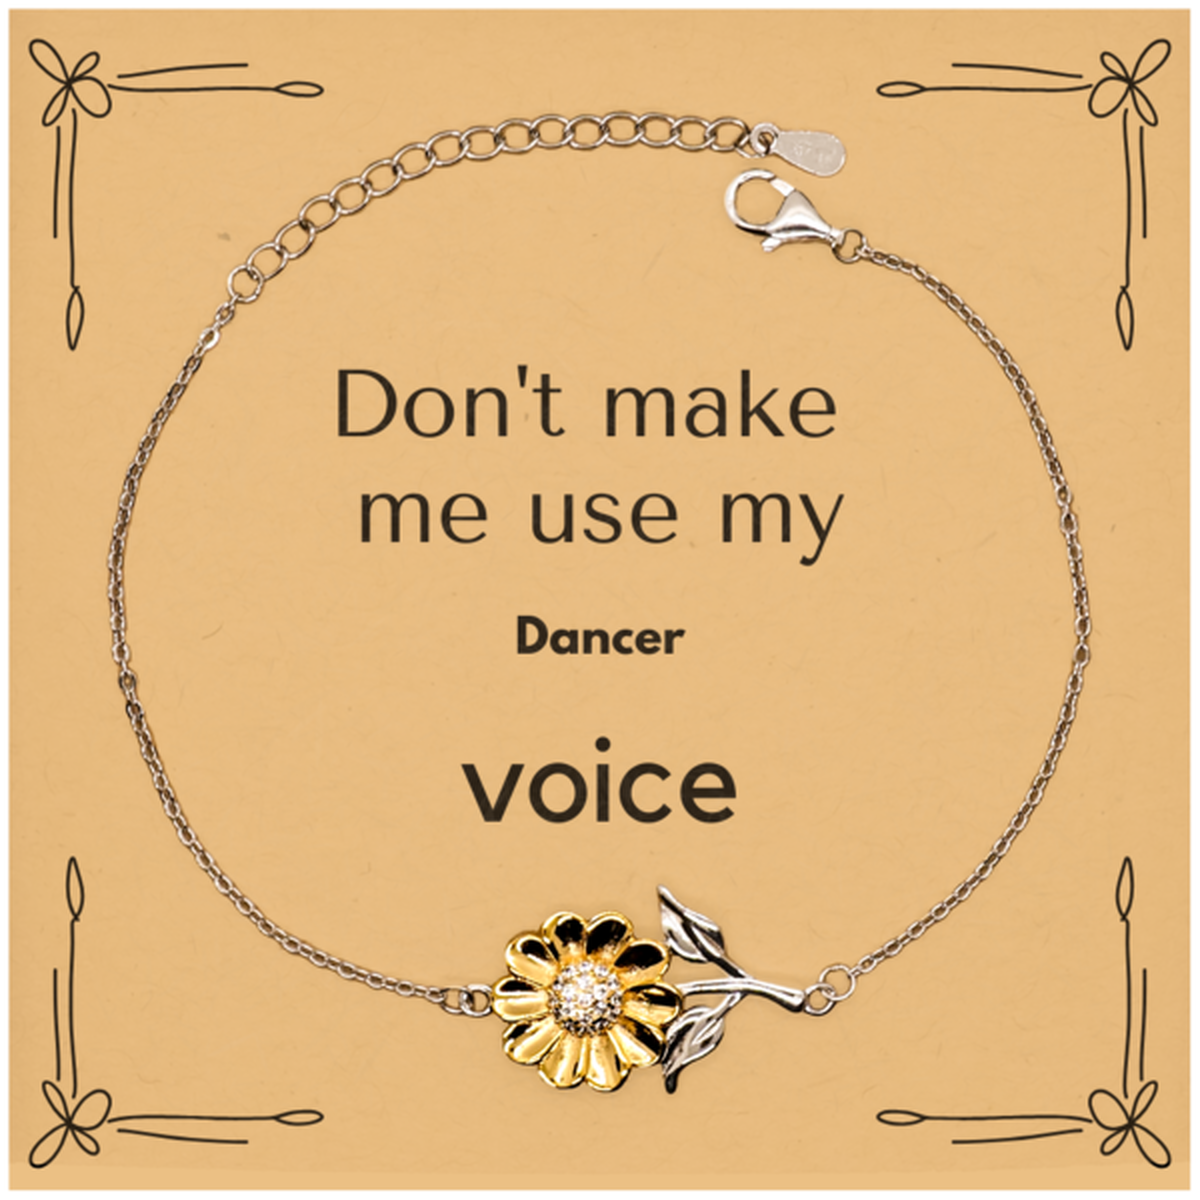 Don't make me use my Dancer voice, Sarcasm Dancer Card Gifts, Christmas Dancer Sunflower Bracelet Birthday Unique Gifts For Dancer Coworkers, Men, Women, Colleague, Friends